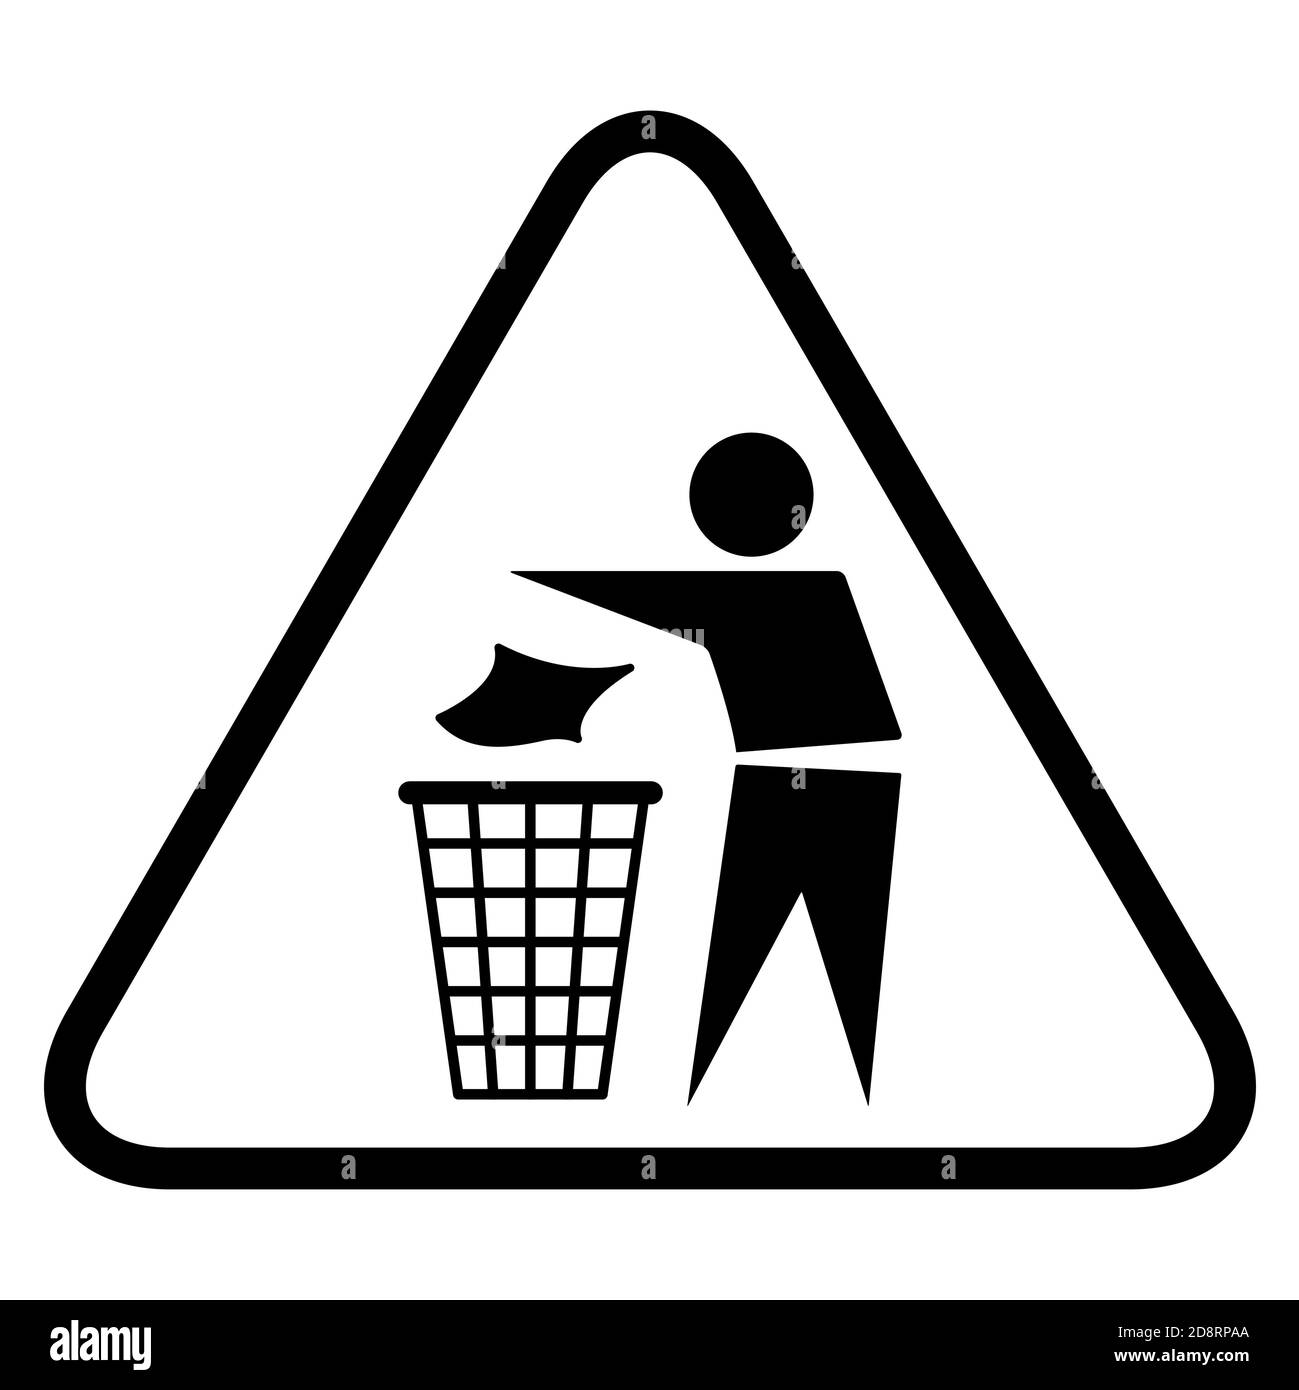 Do not litter flat icon in black triangle isolated on white background. Keep it clean vector illustration. Tidy symbol . Stock Vector